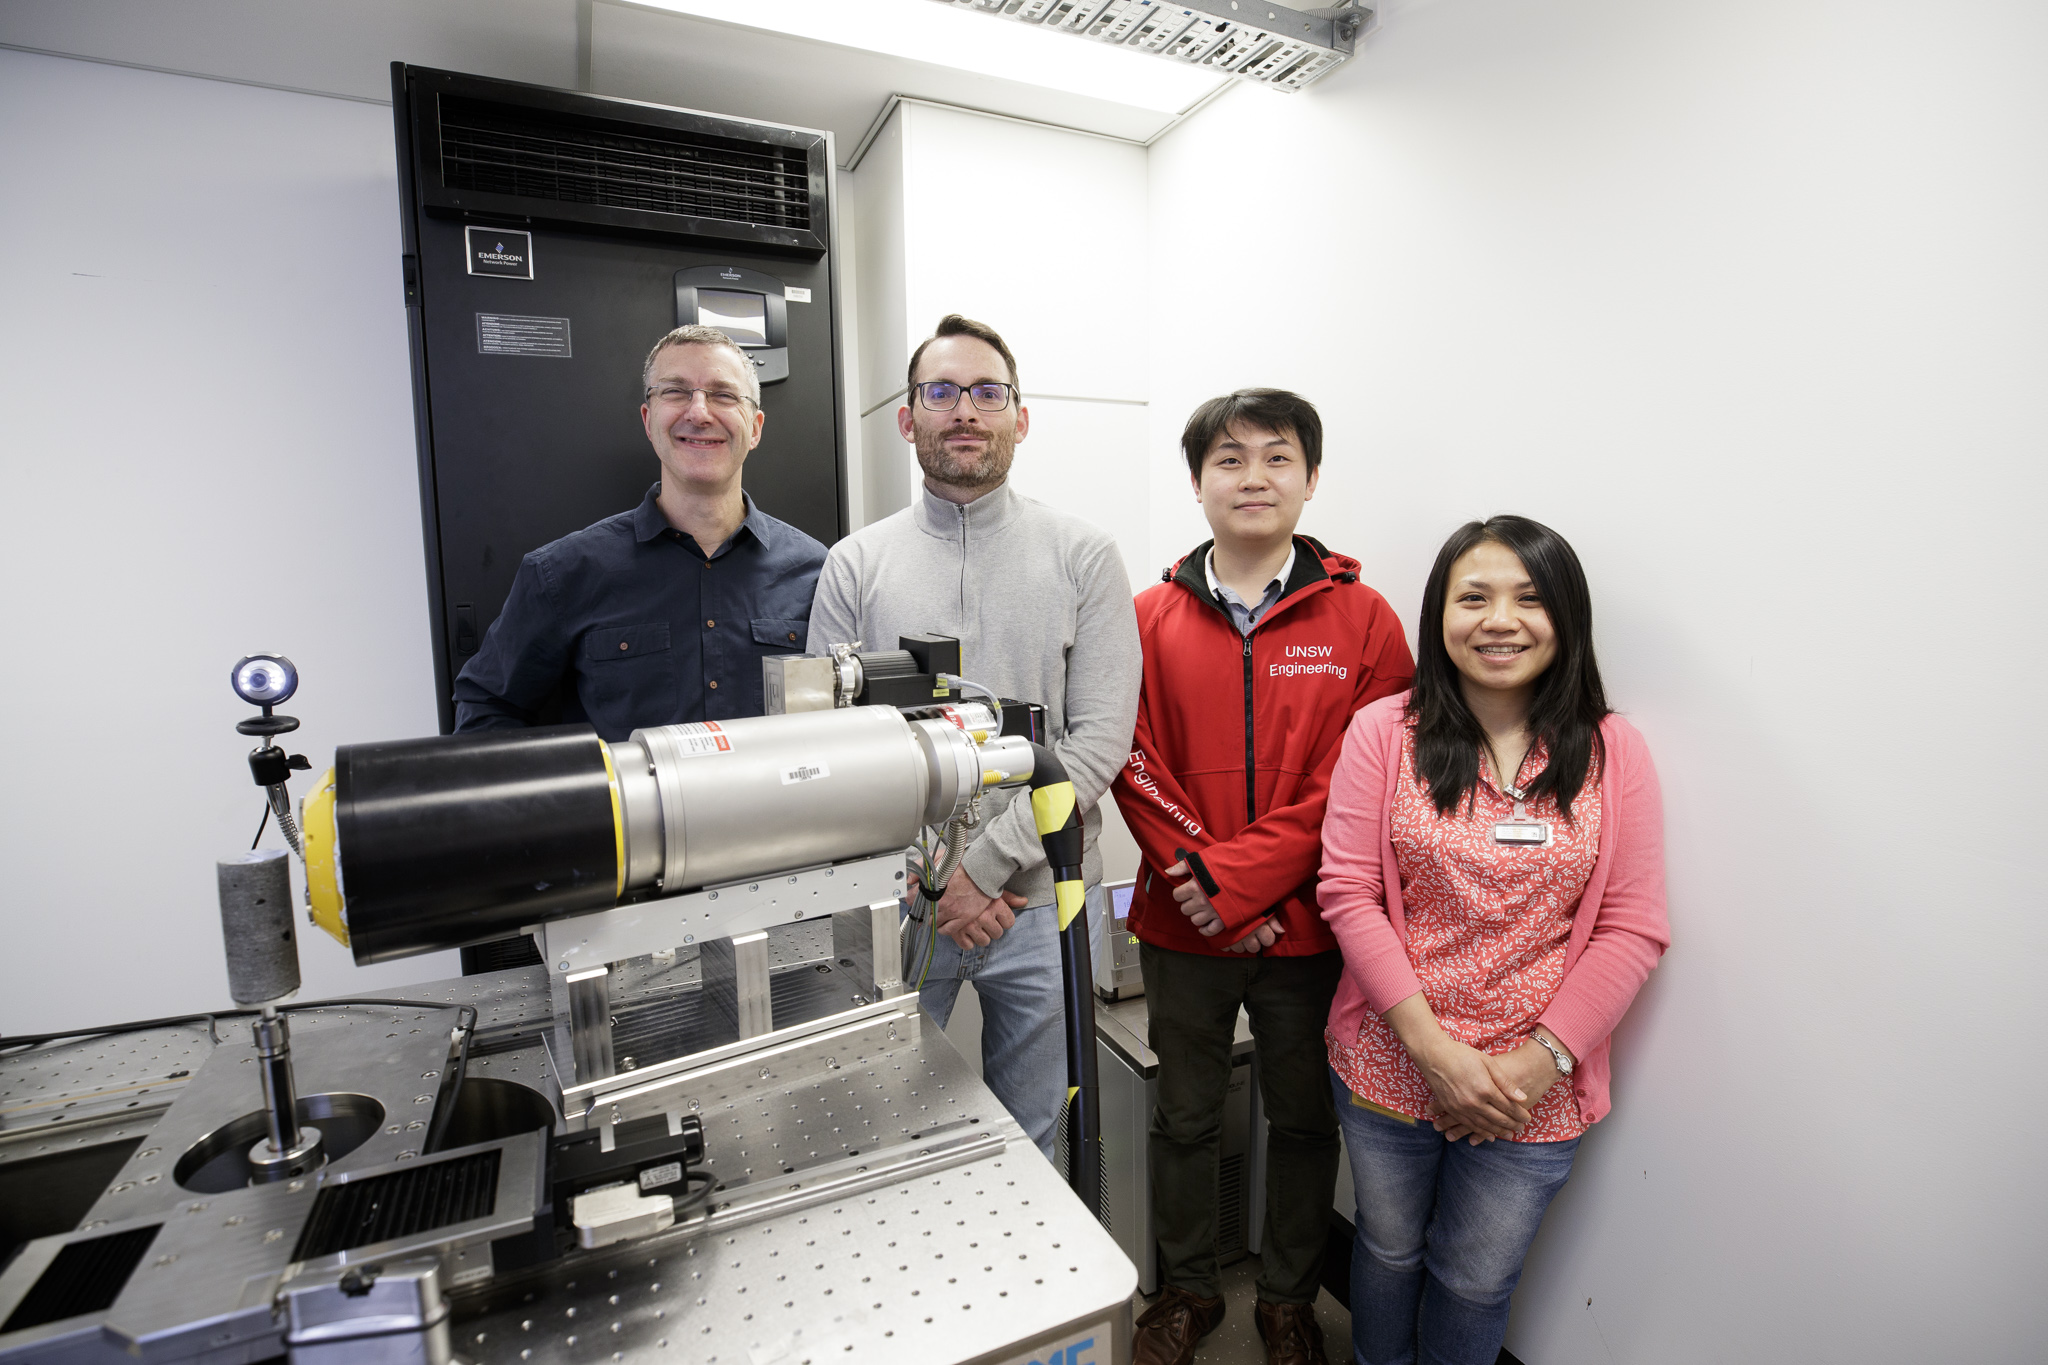 Ryan (second from left) is pictured with colleagues from the school and the micro-CT.